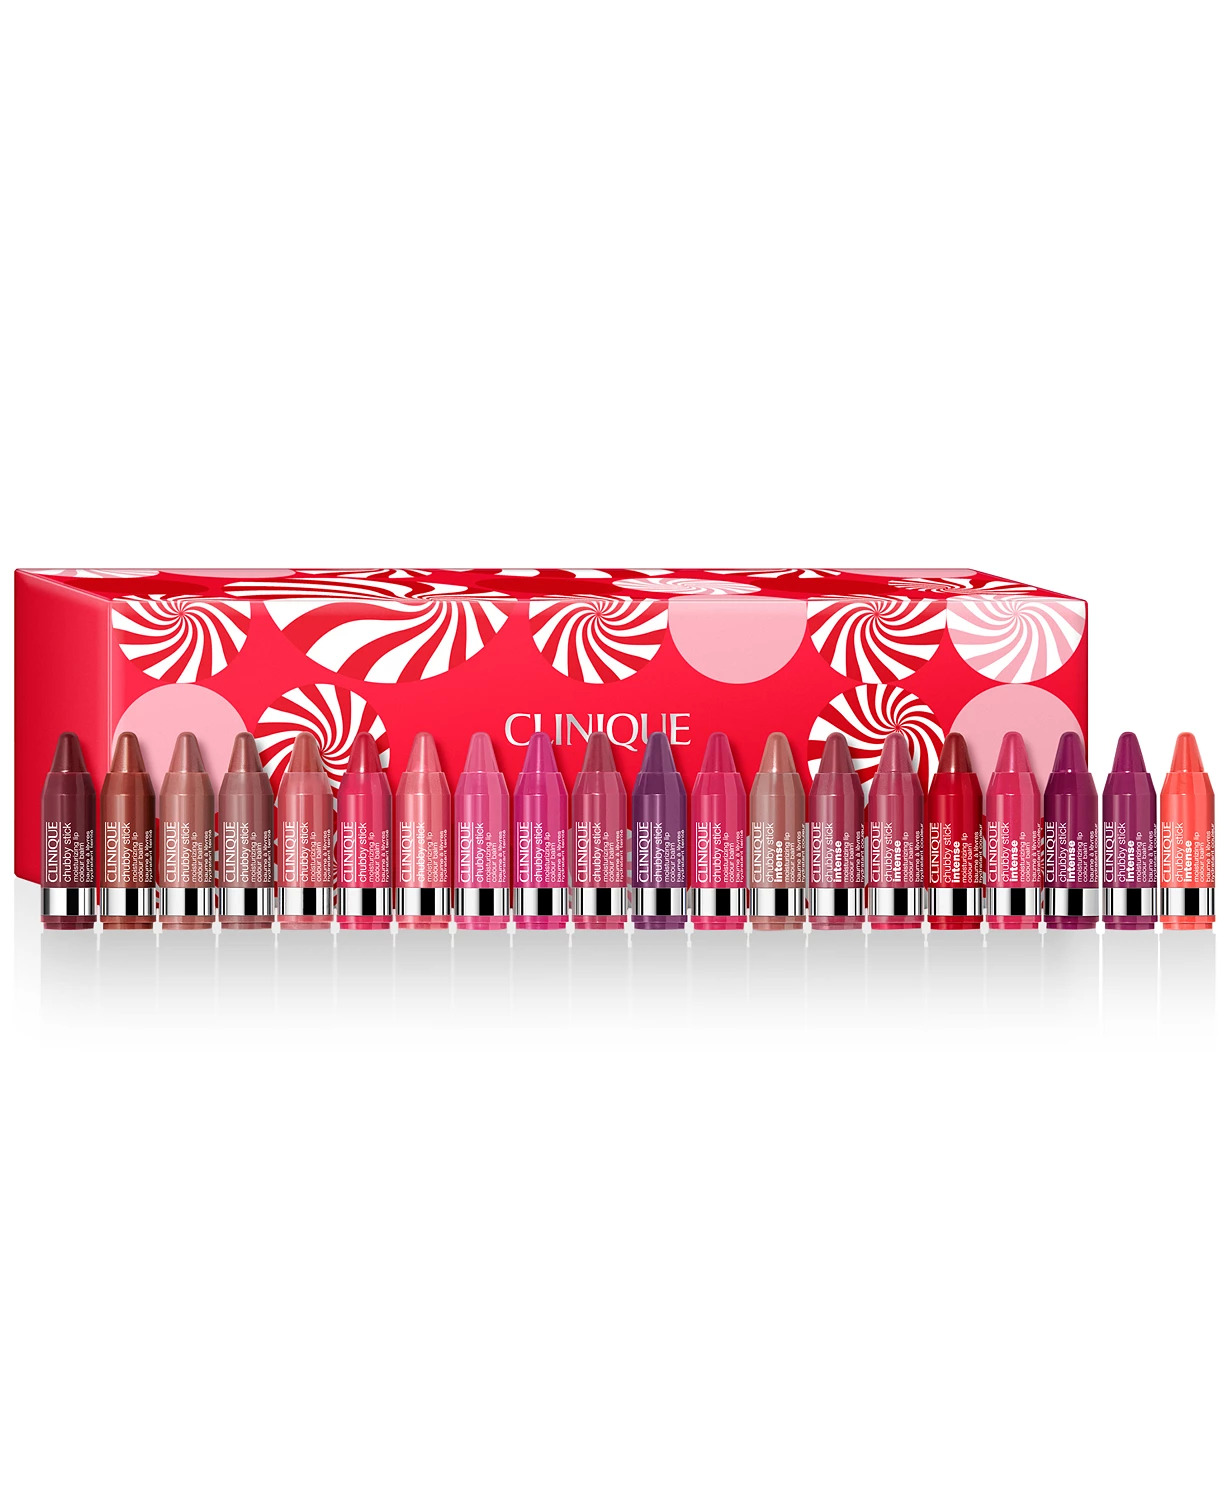 20-Piece The Chubbettes Lipstick Set $24.75 + Free Store Pickup at Macy's or FS on $25+